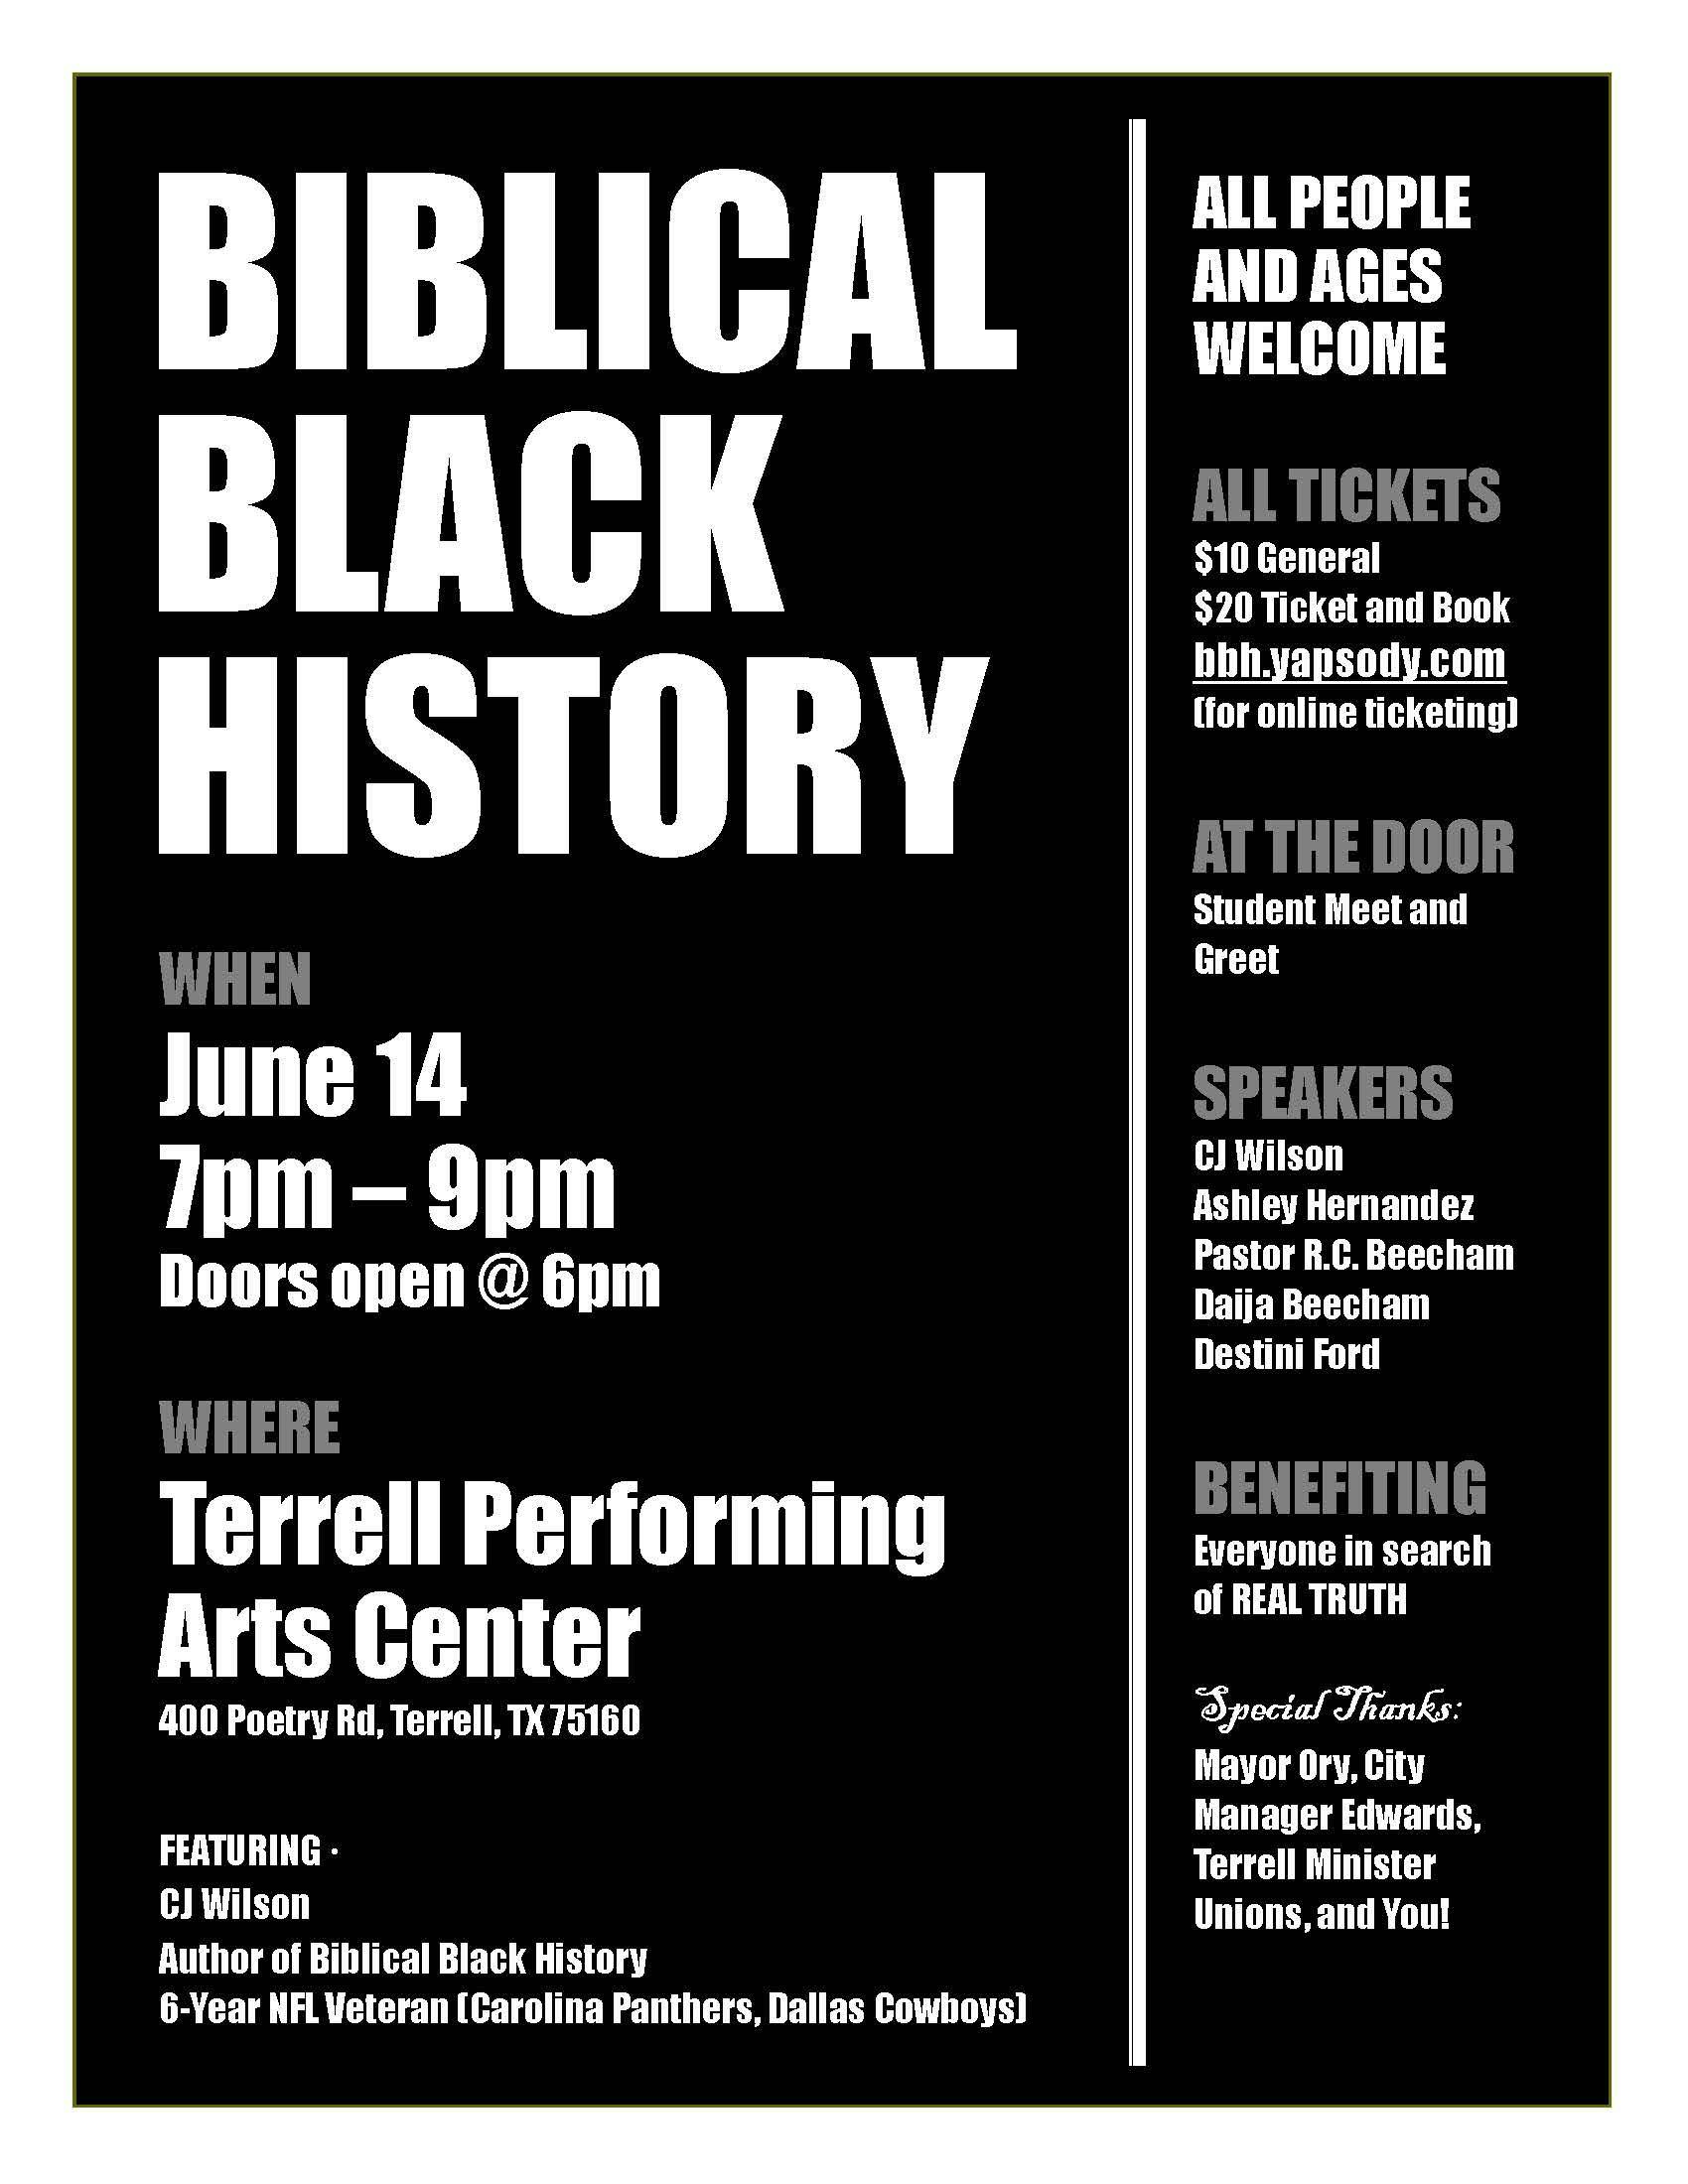 Biblical Black History: Unification Project